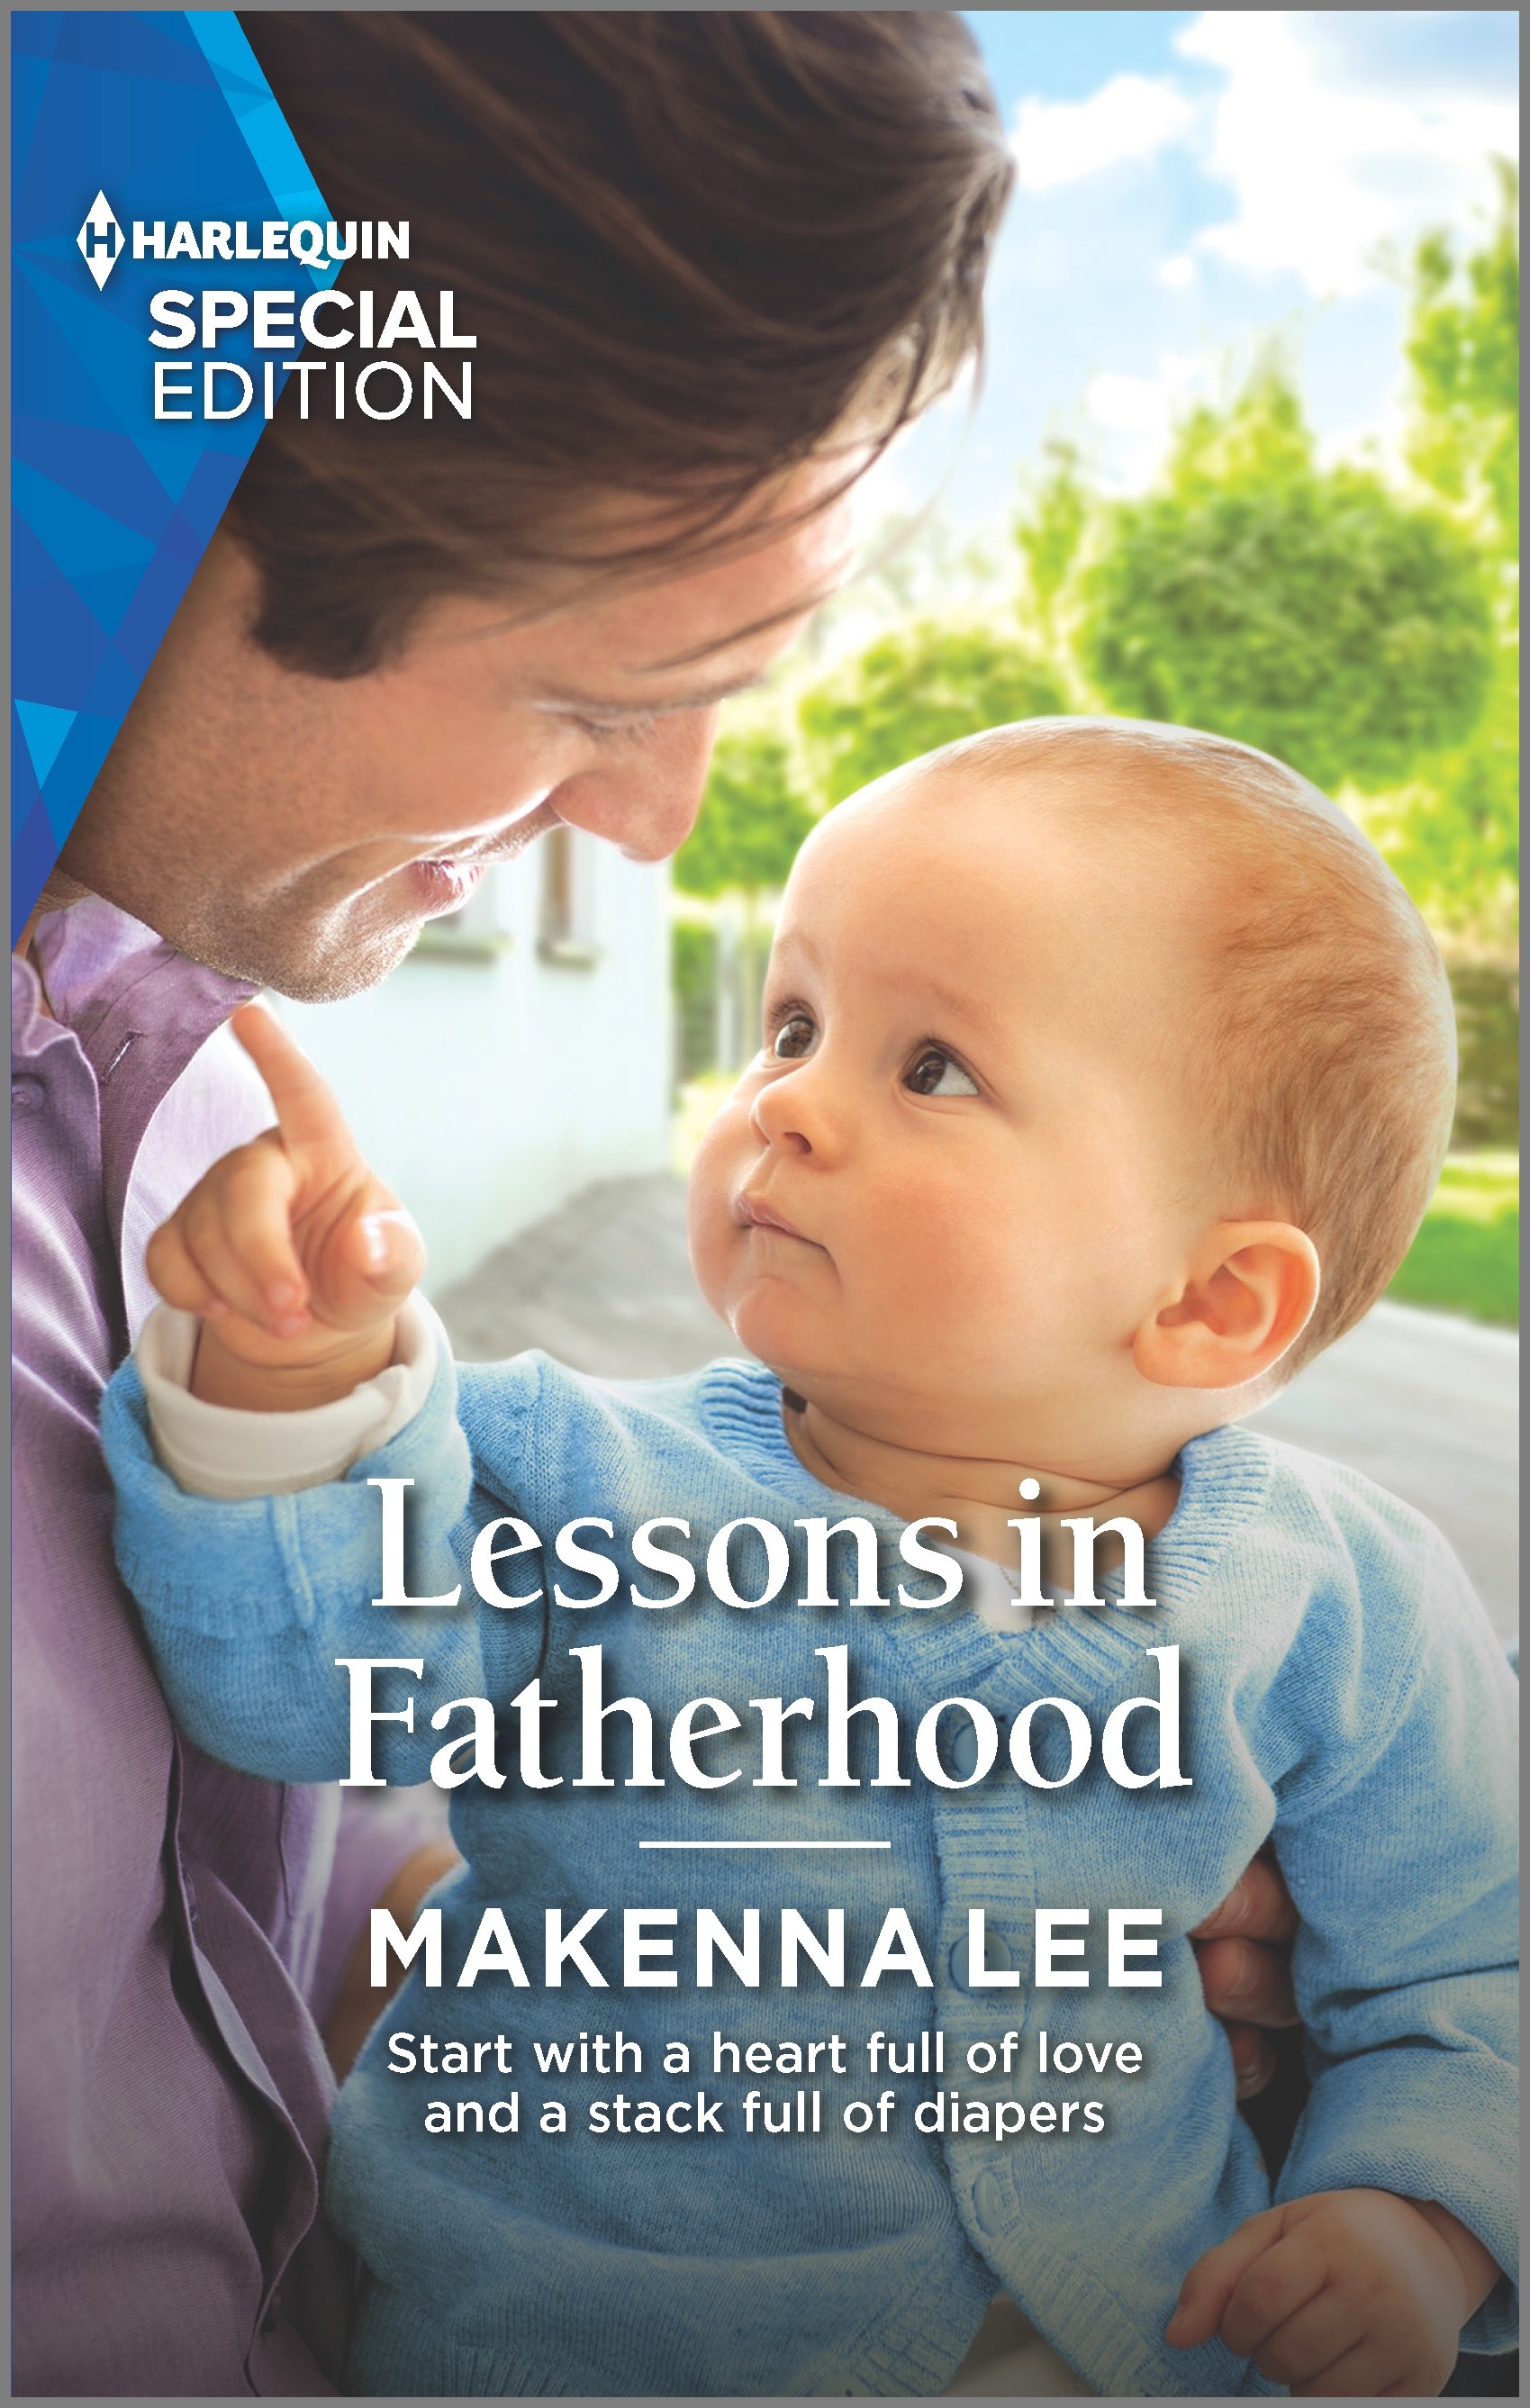 LESSONS IN FATHERHOOD by Makenna Lee